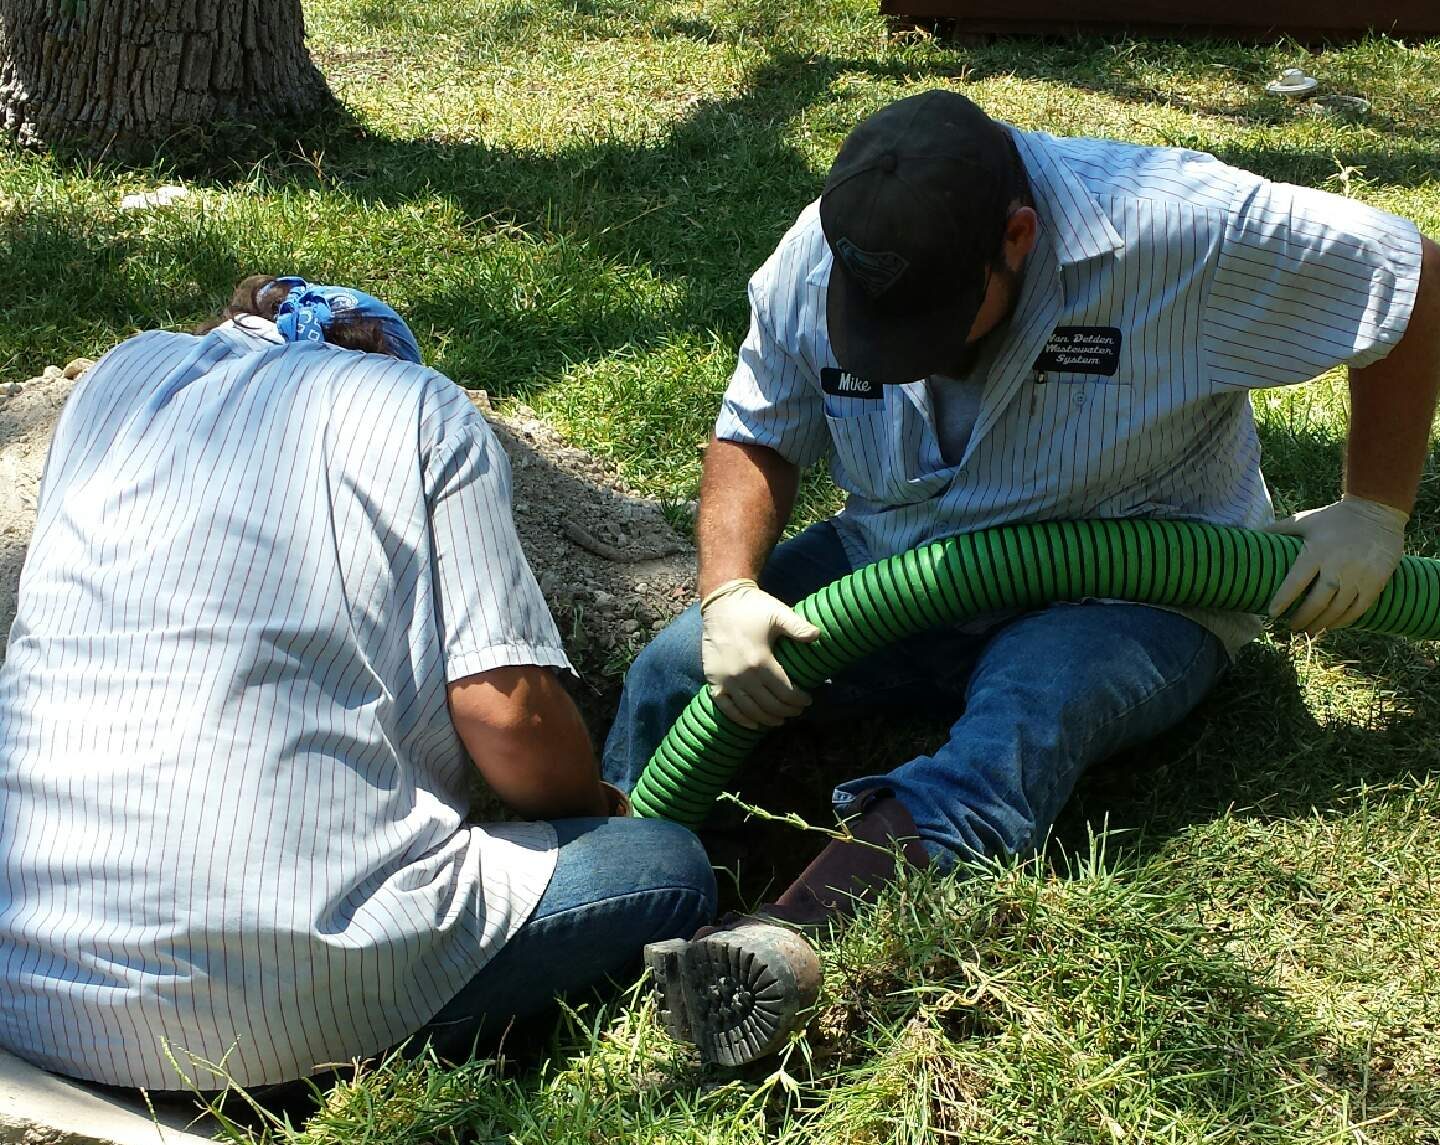 Septic Tank Inspections